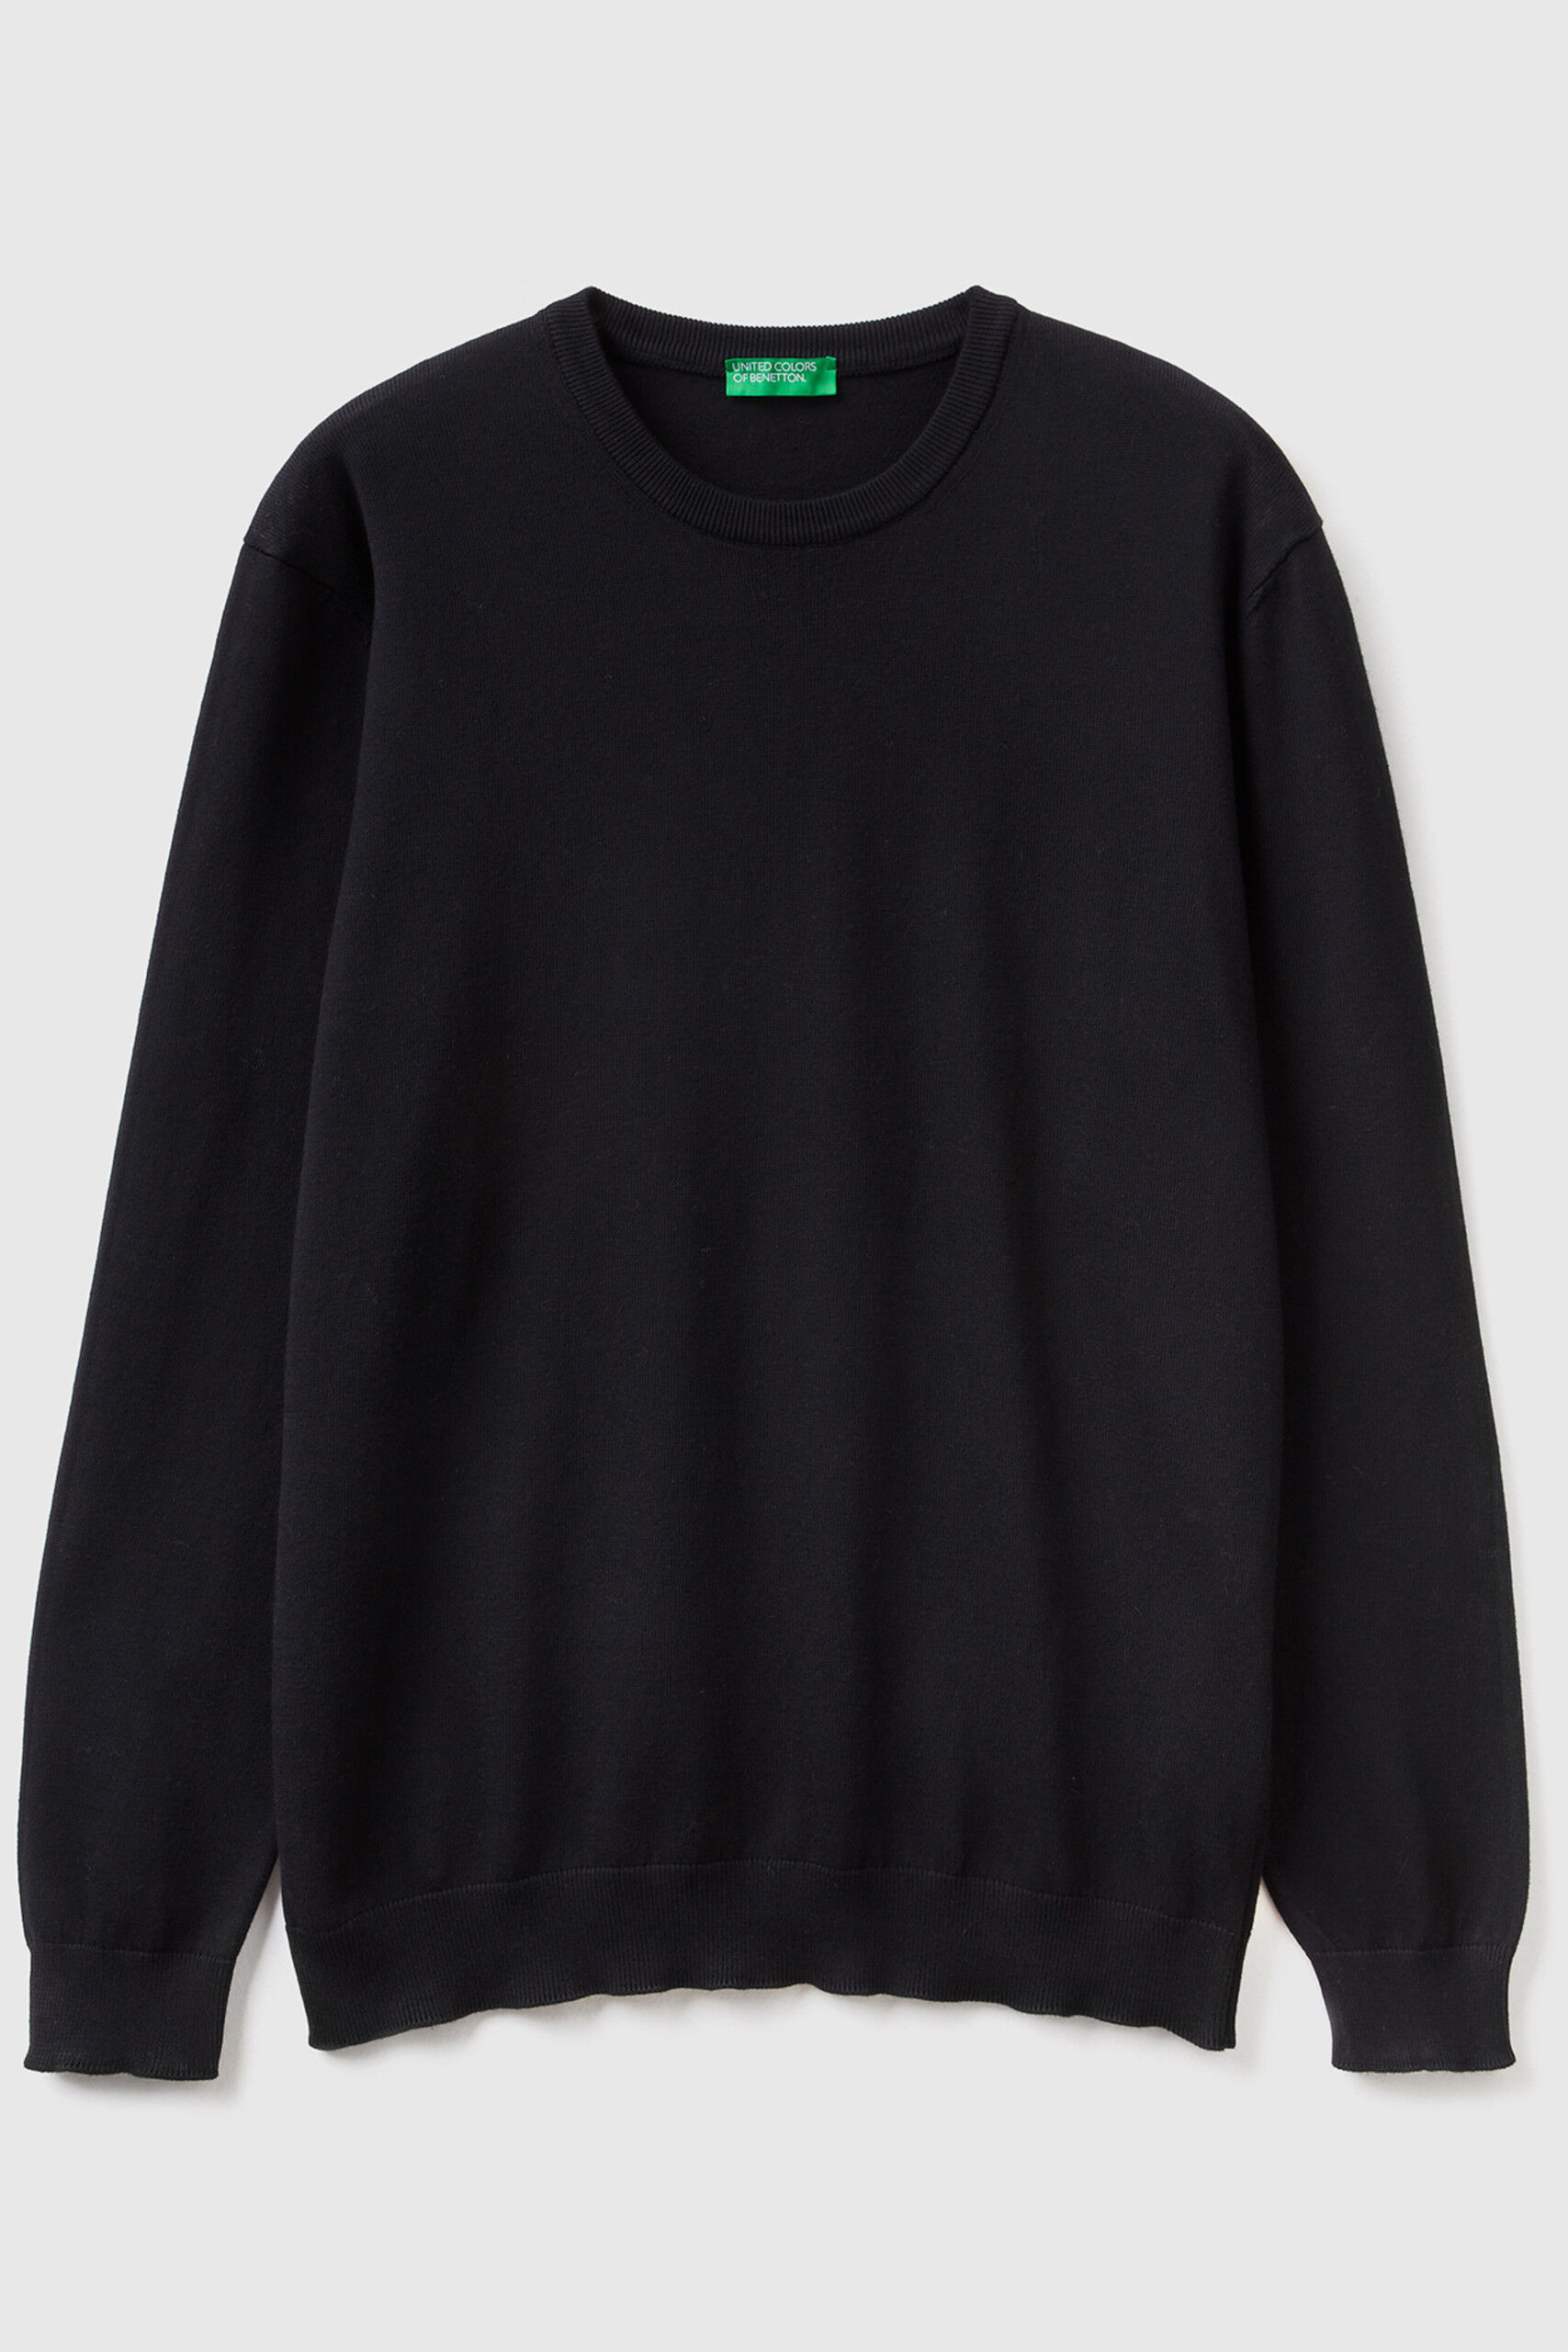 Men's Iconic Tricot Cotton Knitwear Collection 2023 | Benetton